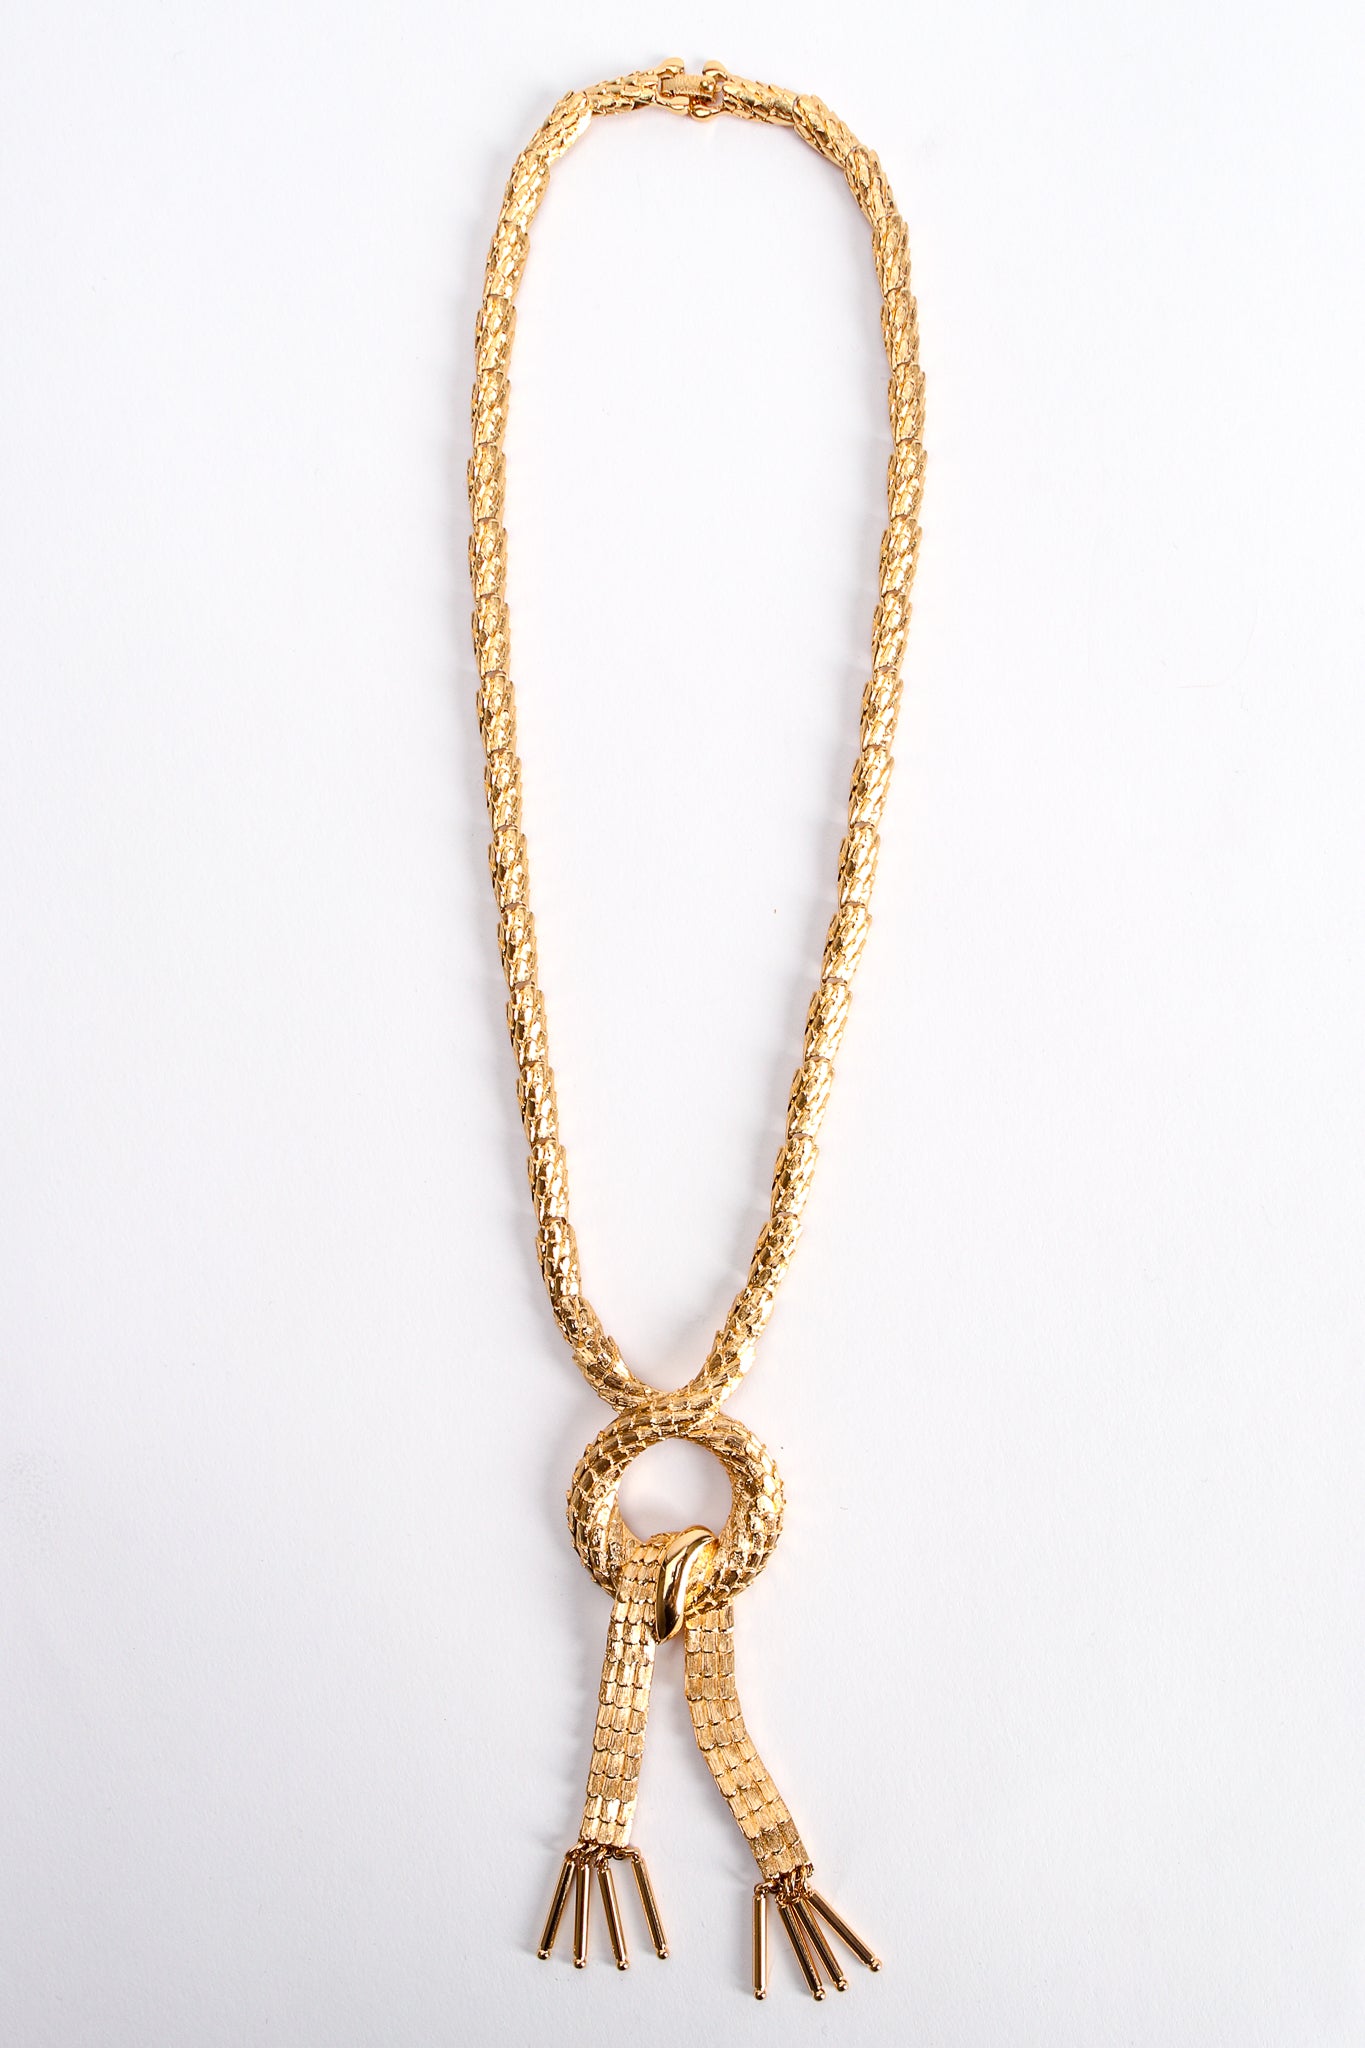 Vintage Monet Dragon Scale Knot Tassel Necklace at Recess Los Angeles